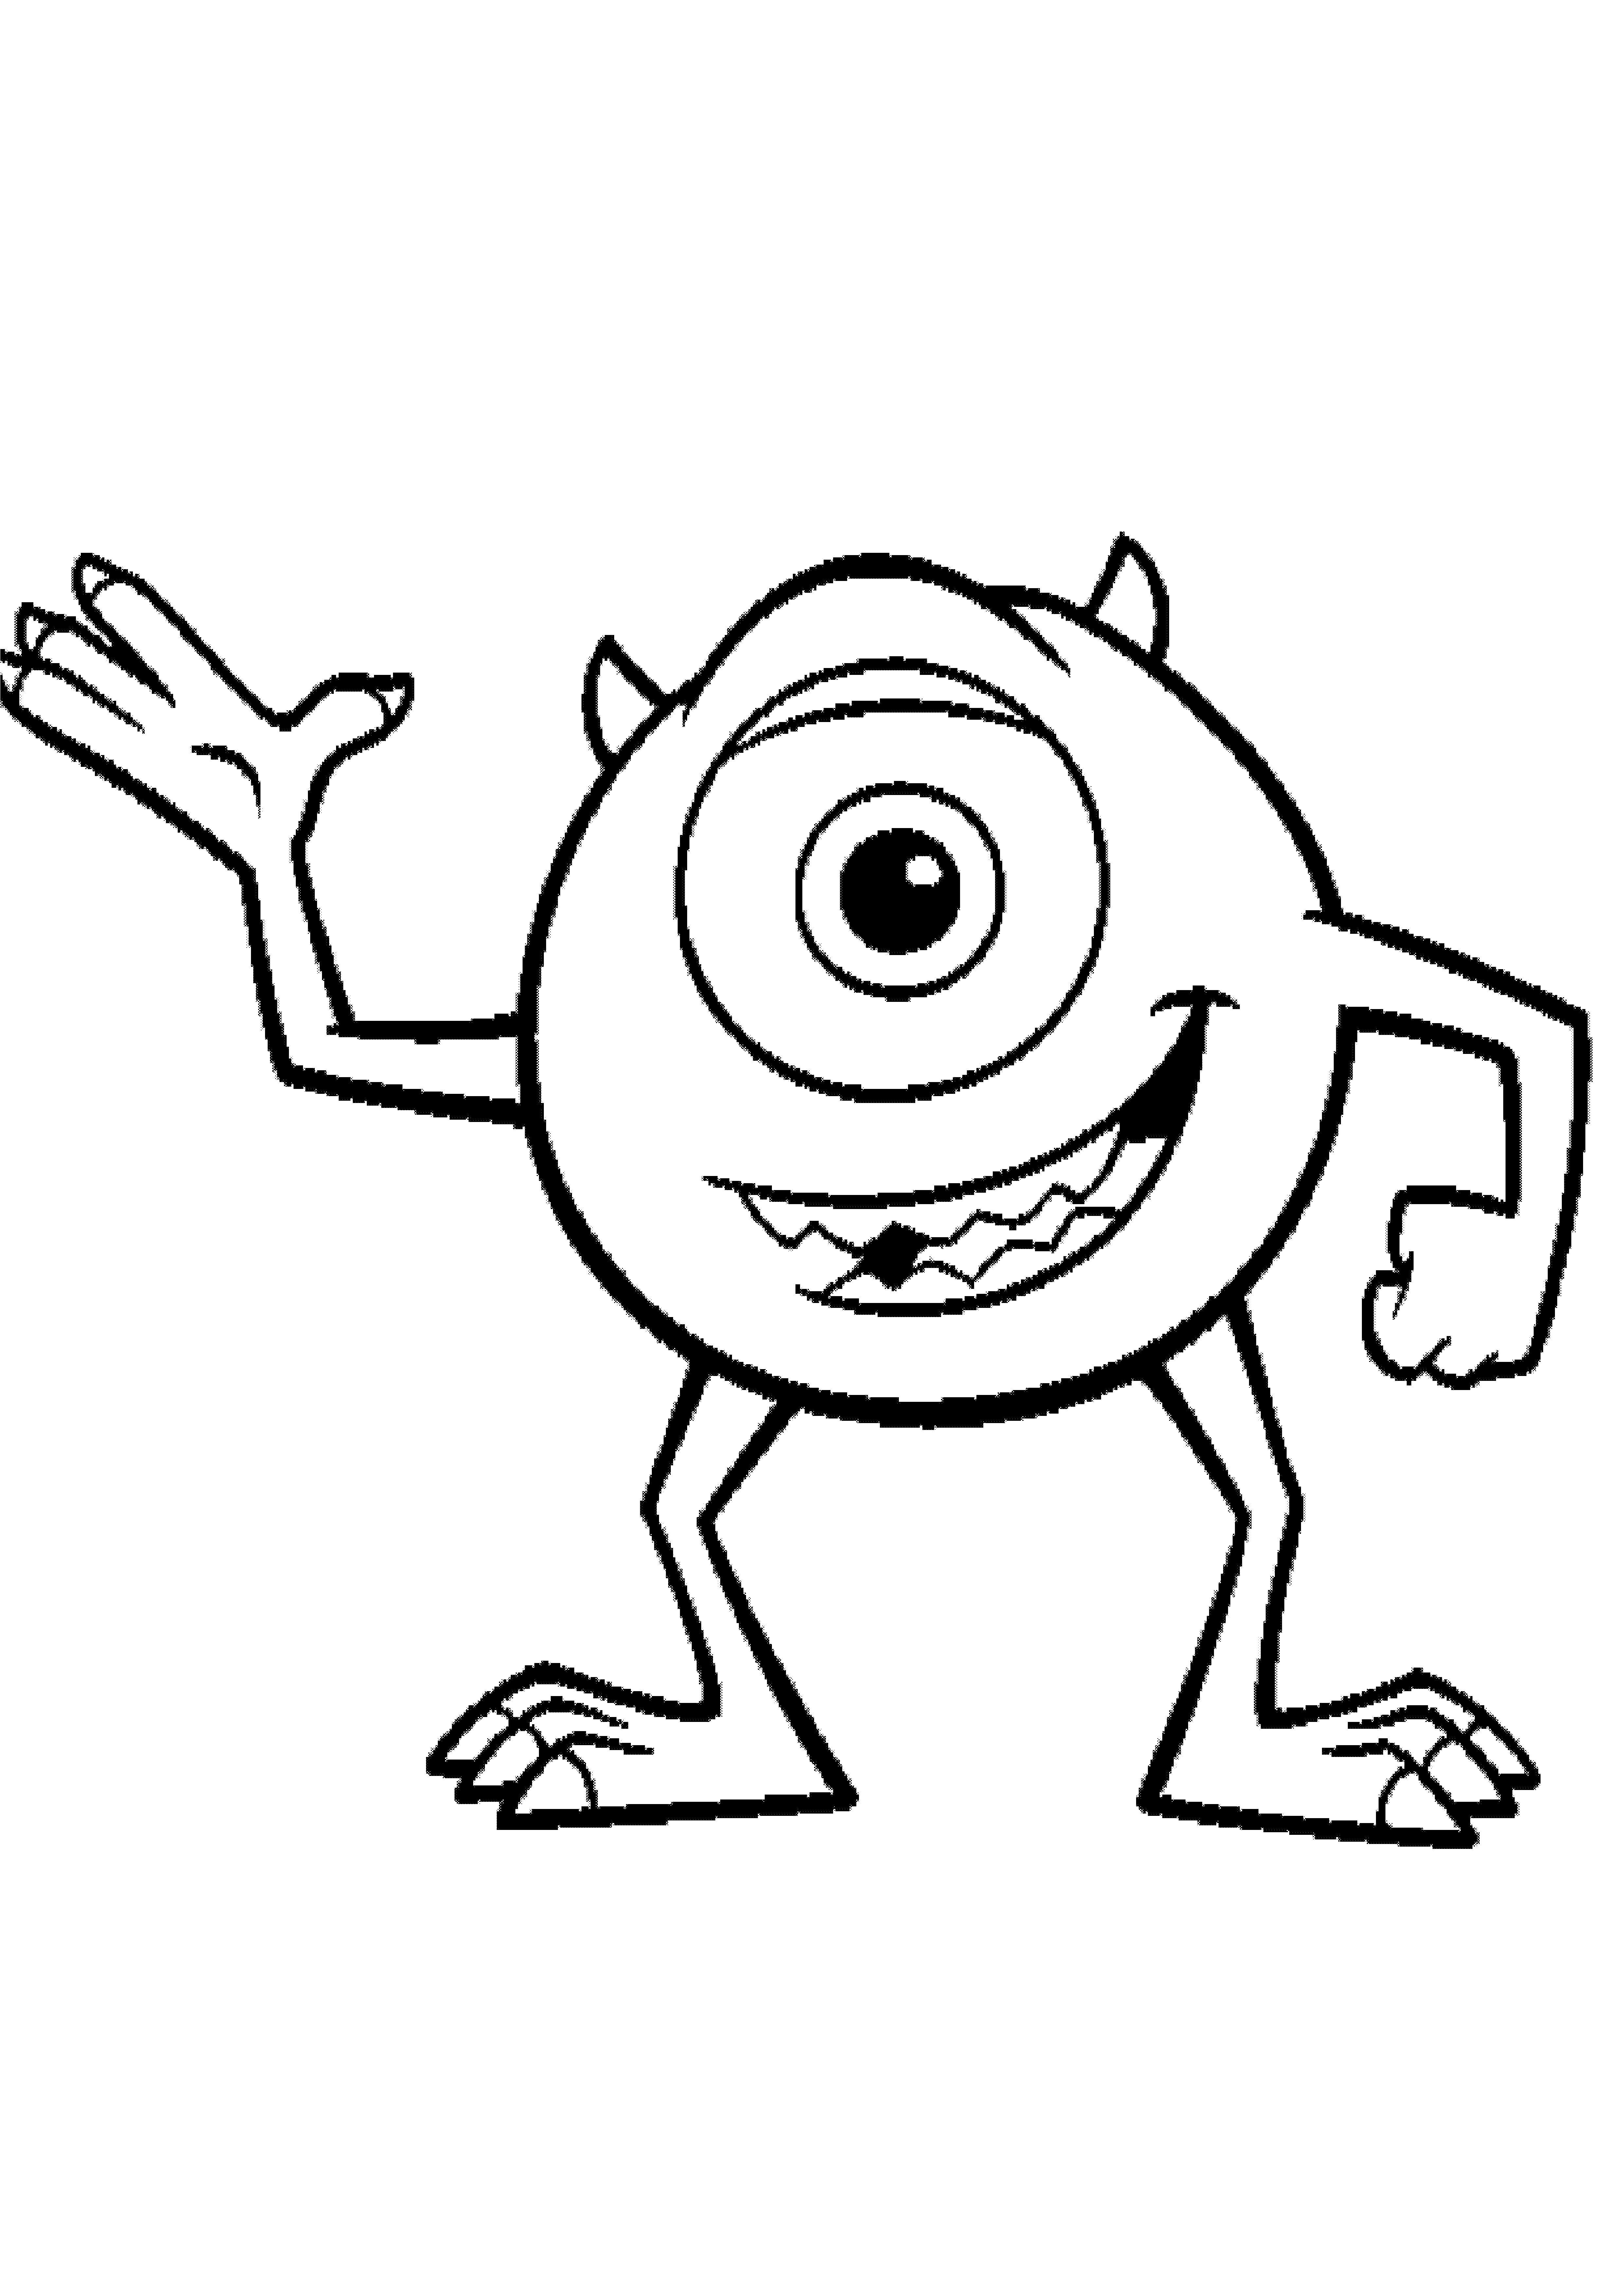 King Boo Coloring Pages - Cliparts.co